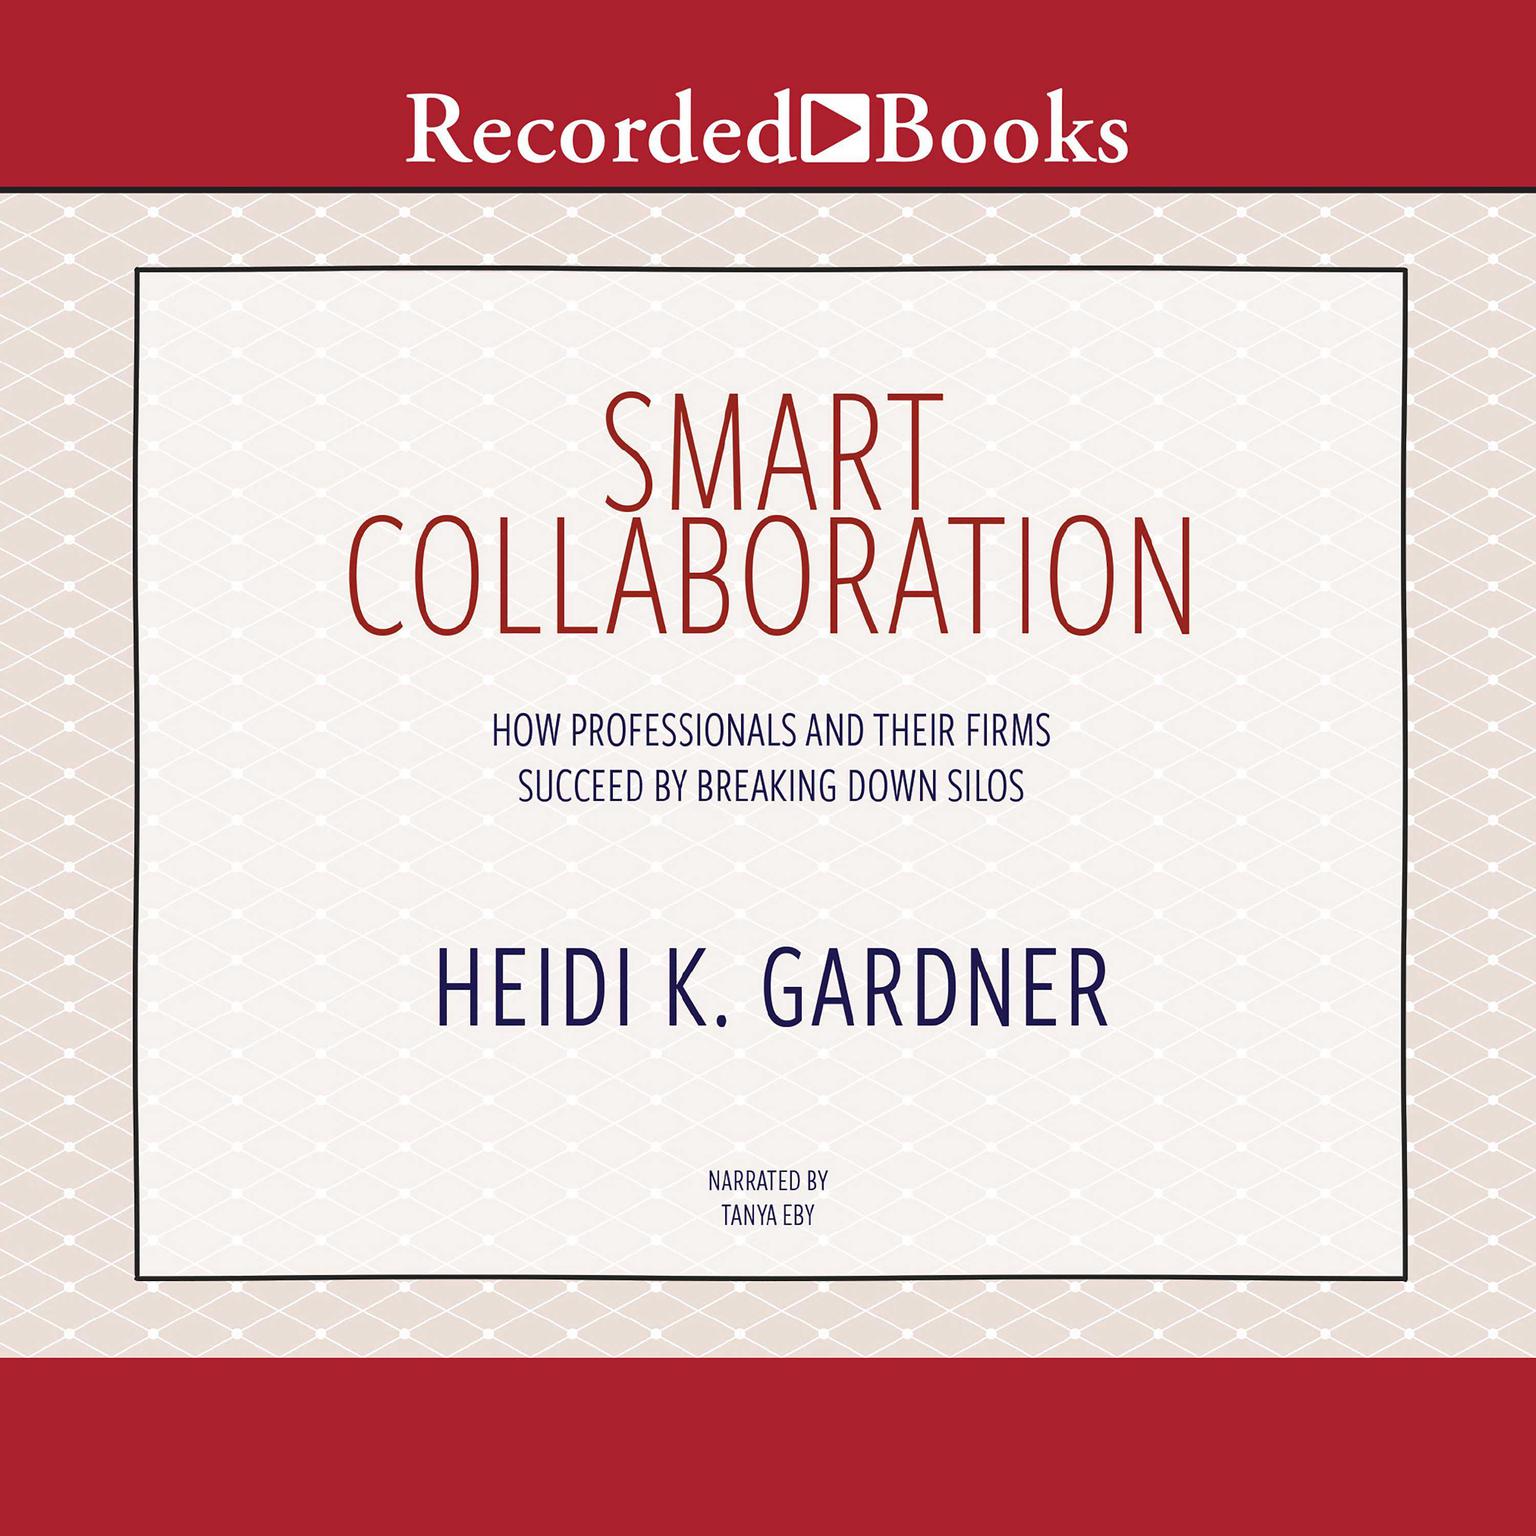 Smart Collaboration: How Professionals and Their Firms Succeed by Breaking Down Silos Audiobook, by Heidi K. Gardner